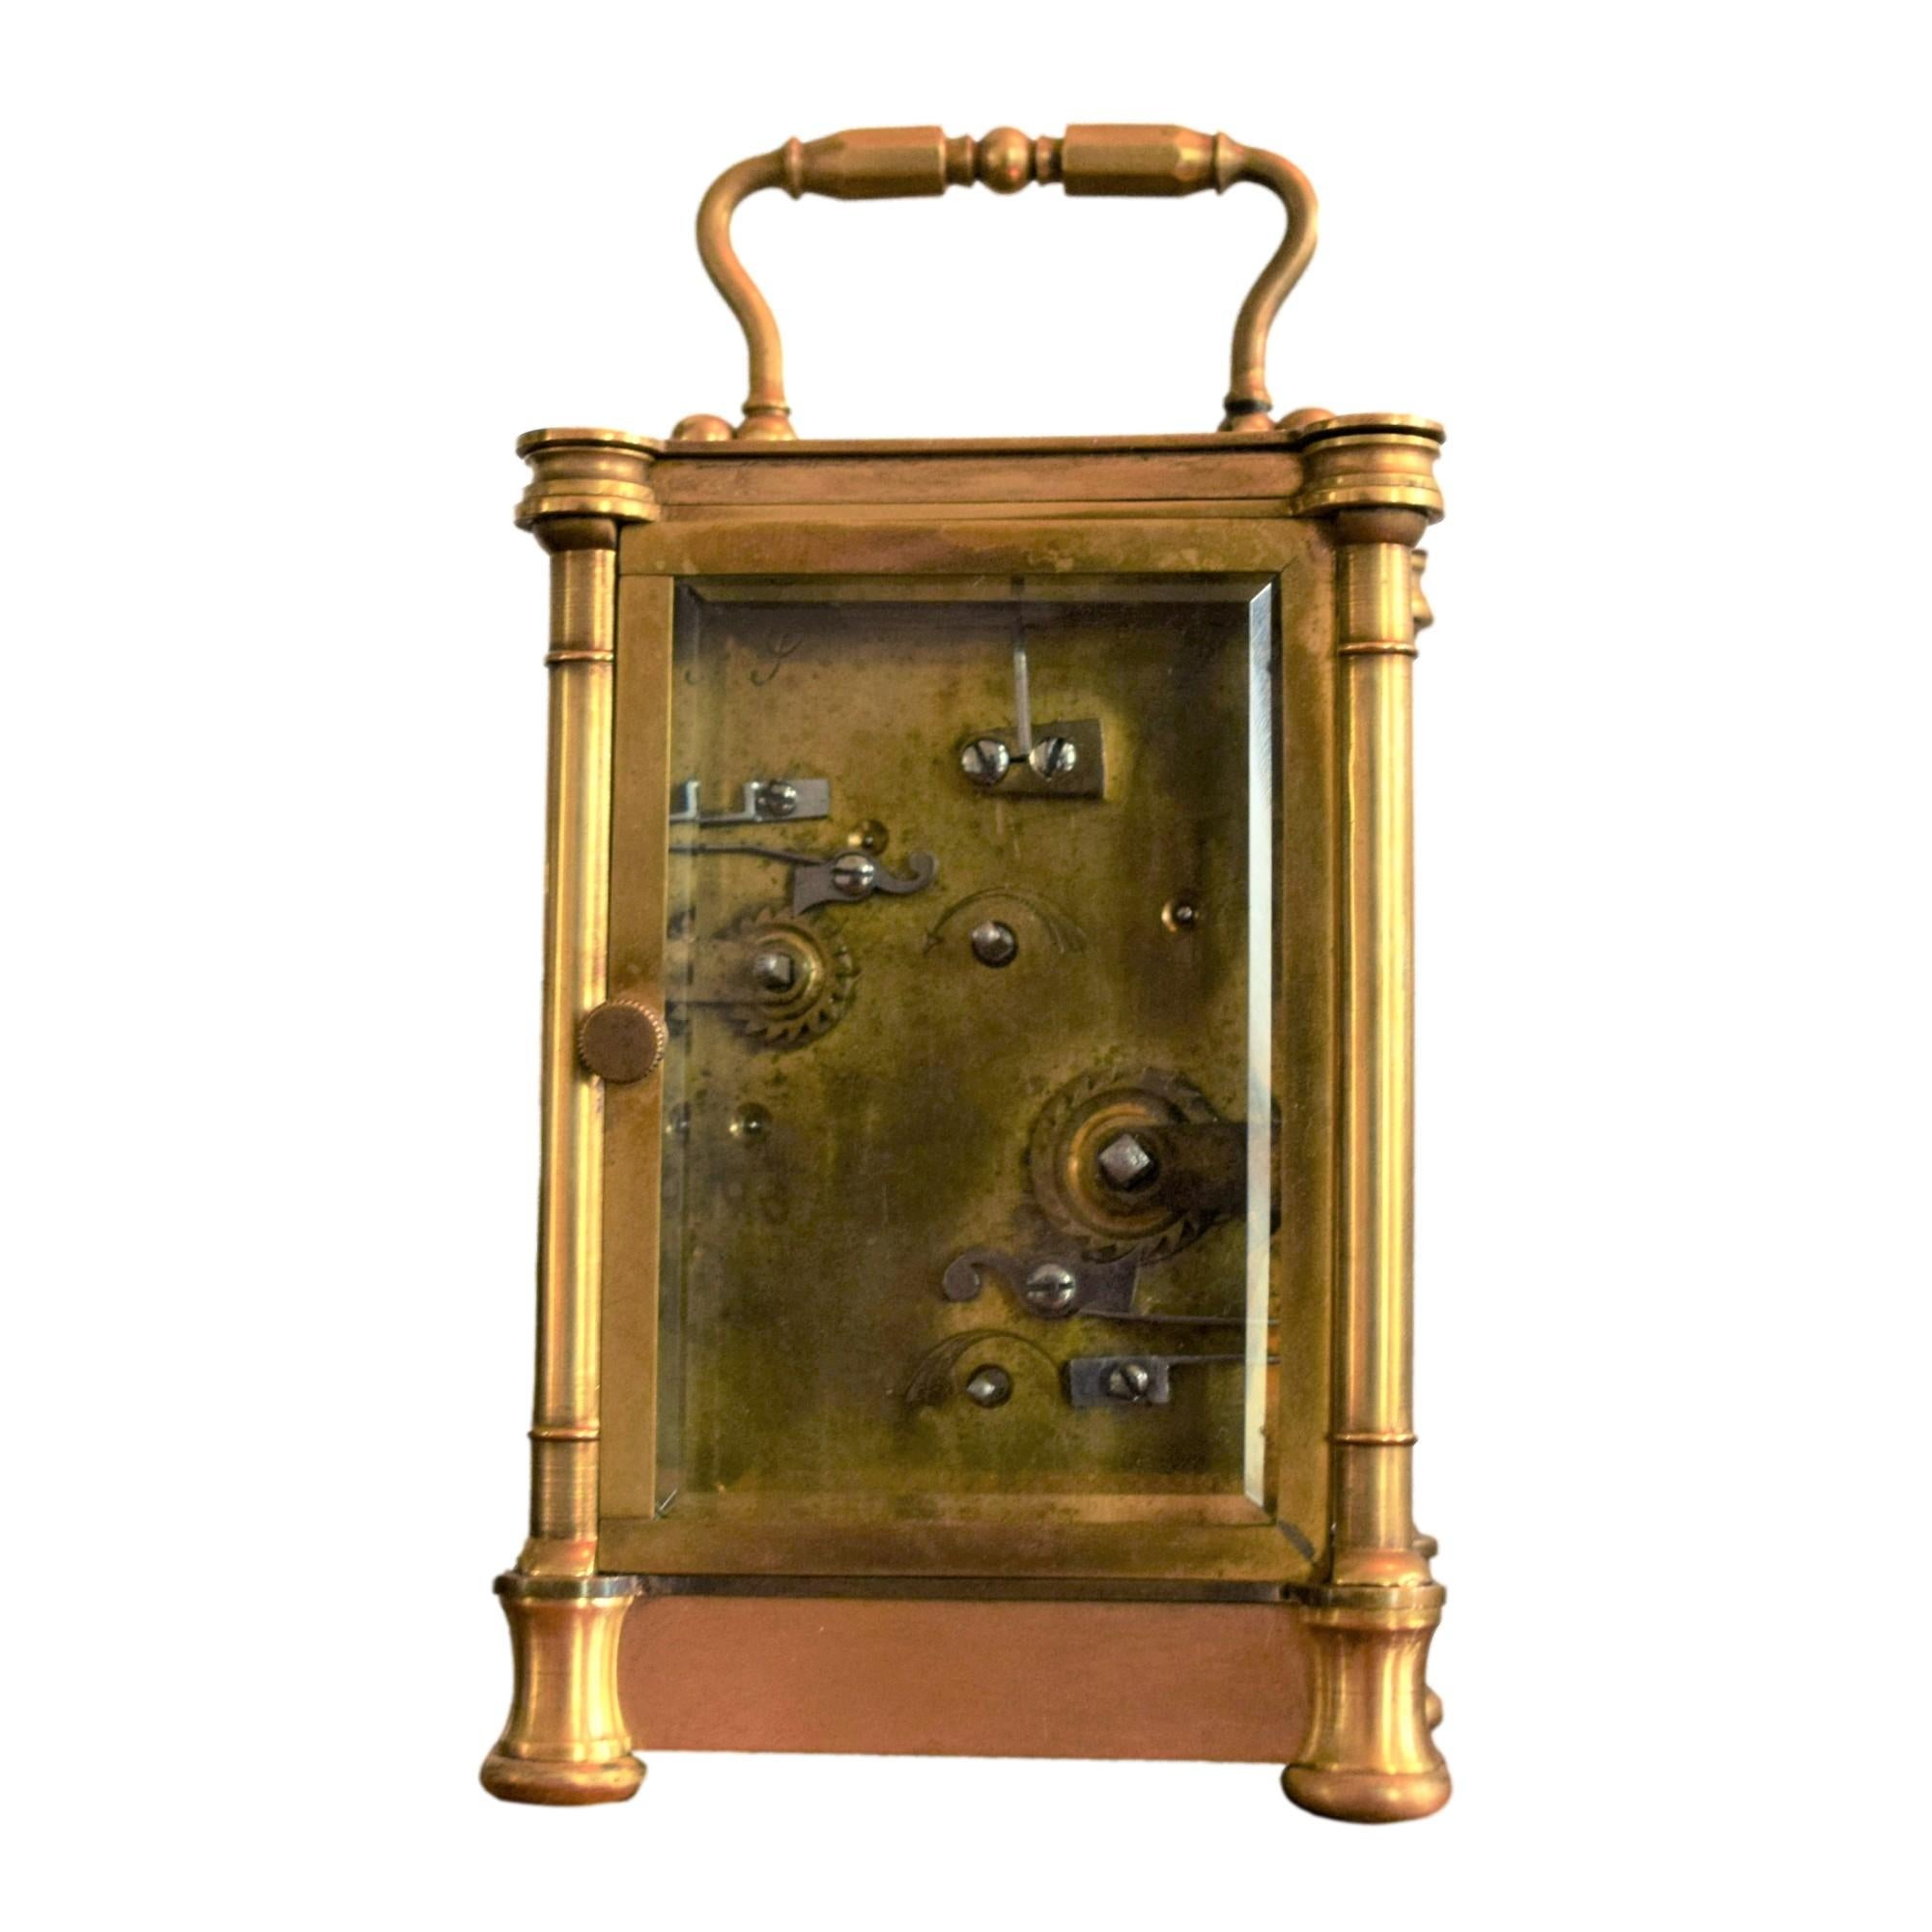 

A charming officer’s clock in gilt bronze and crystal, presented in its box.

The clock is finely chiseled with a decoration of scrolls and bunches of grapes, framed by fluted pilasters with a fine band of arabesque on the upper and lower